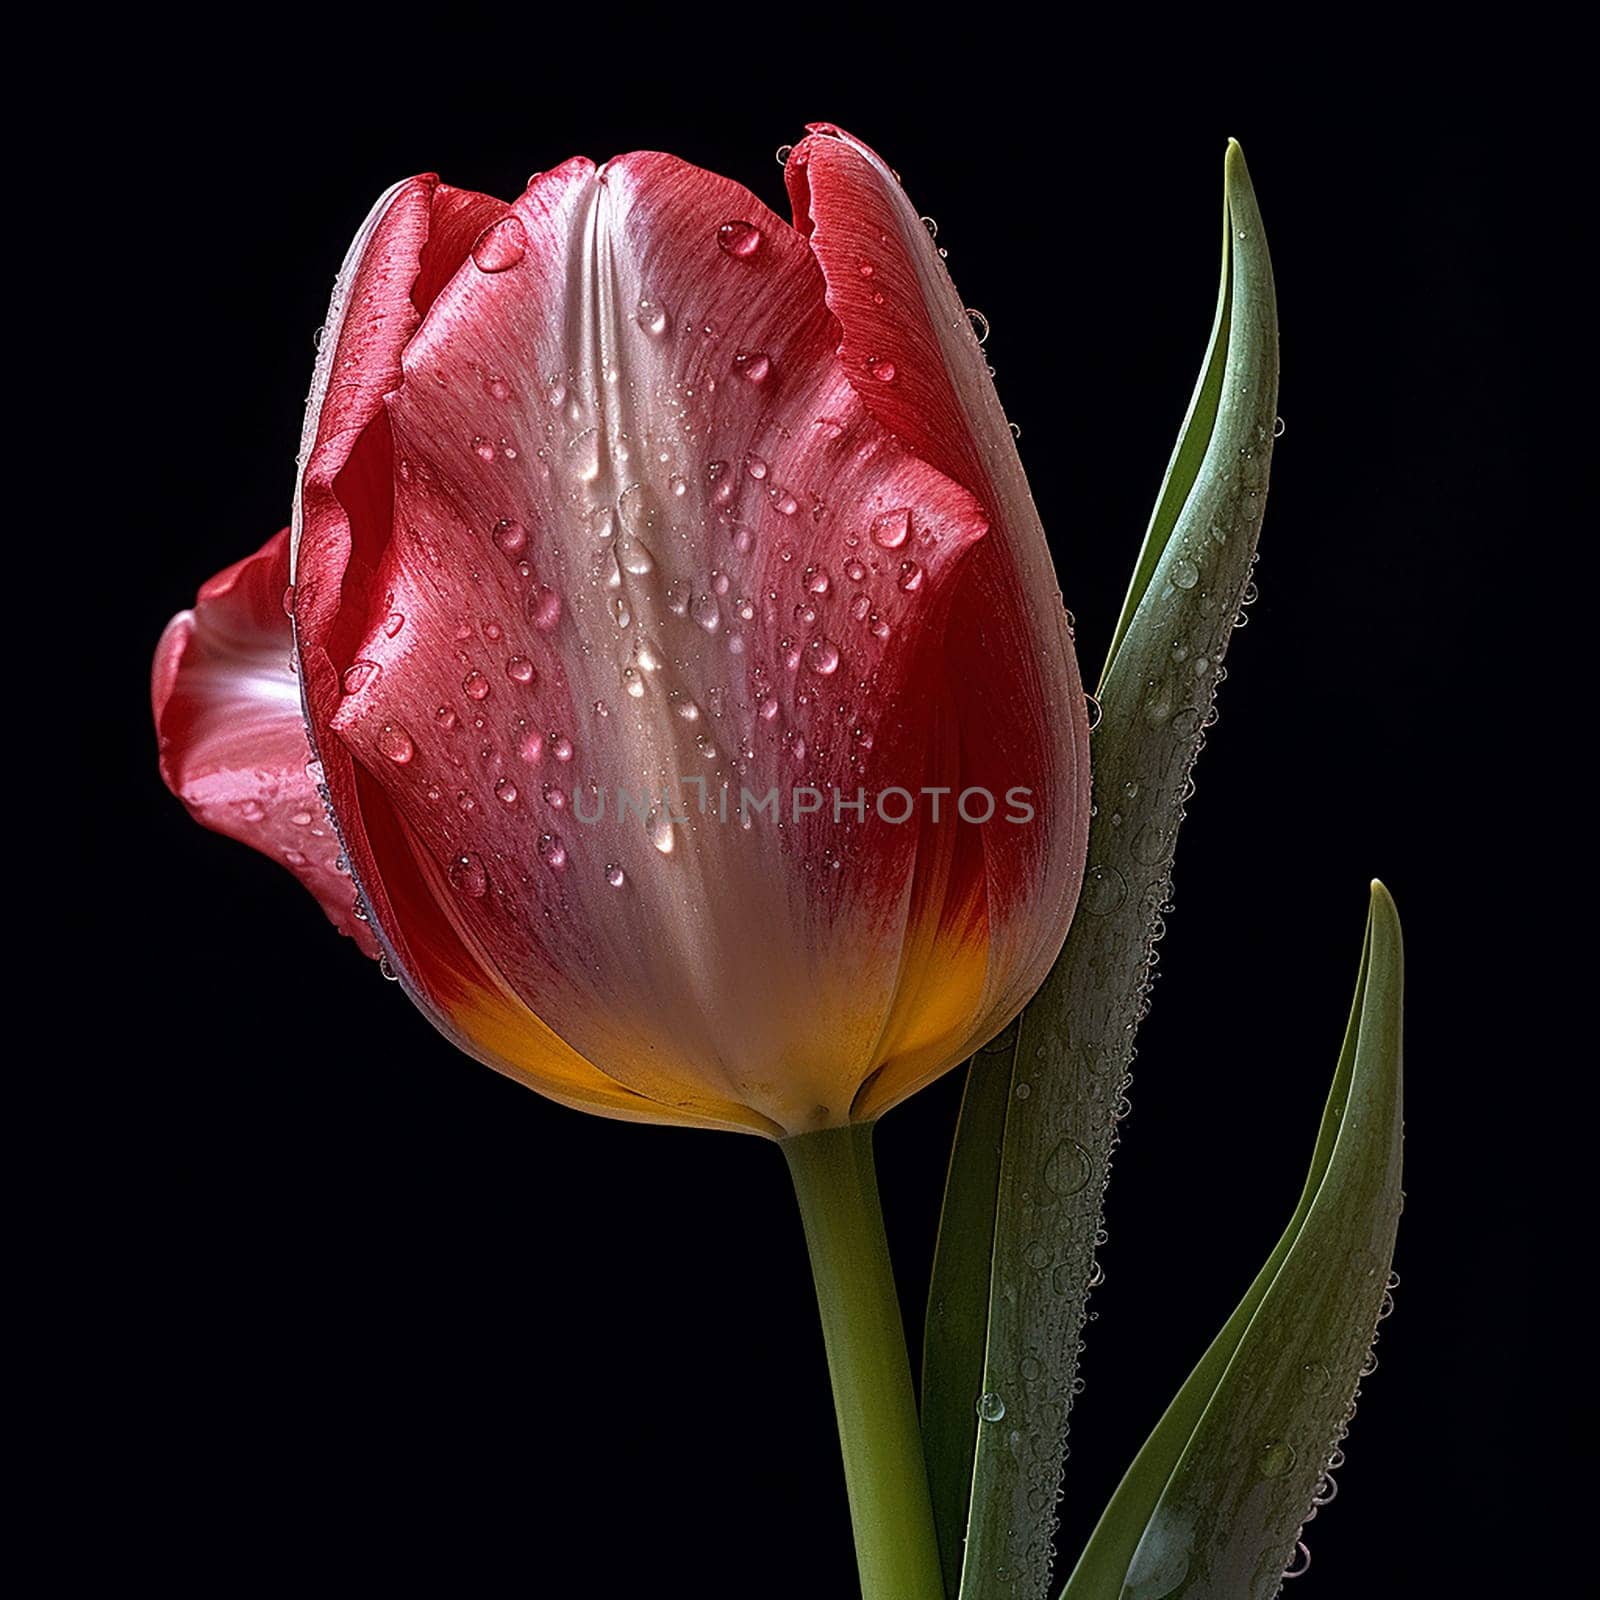 Close up of a red tulip with water droplets against a dark background by Hype2art